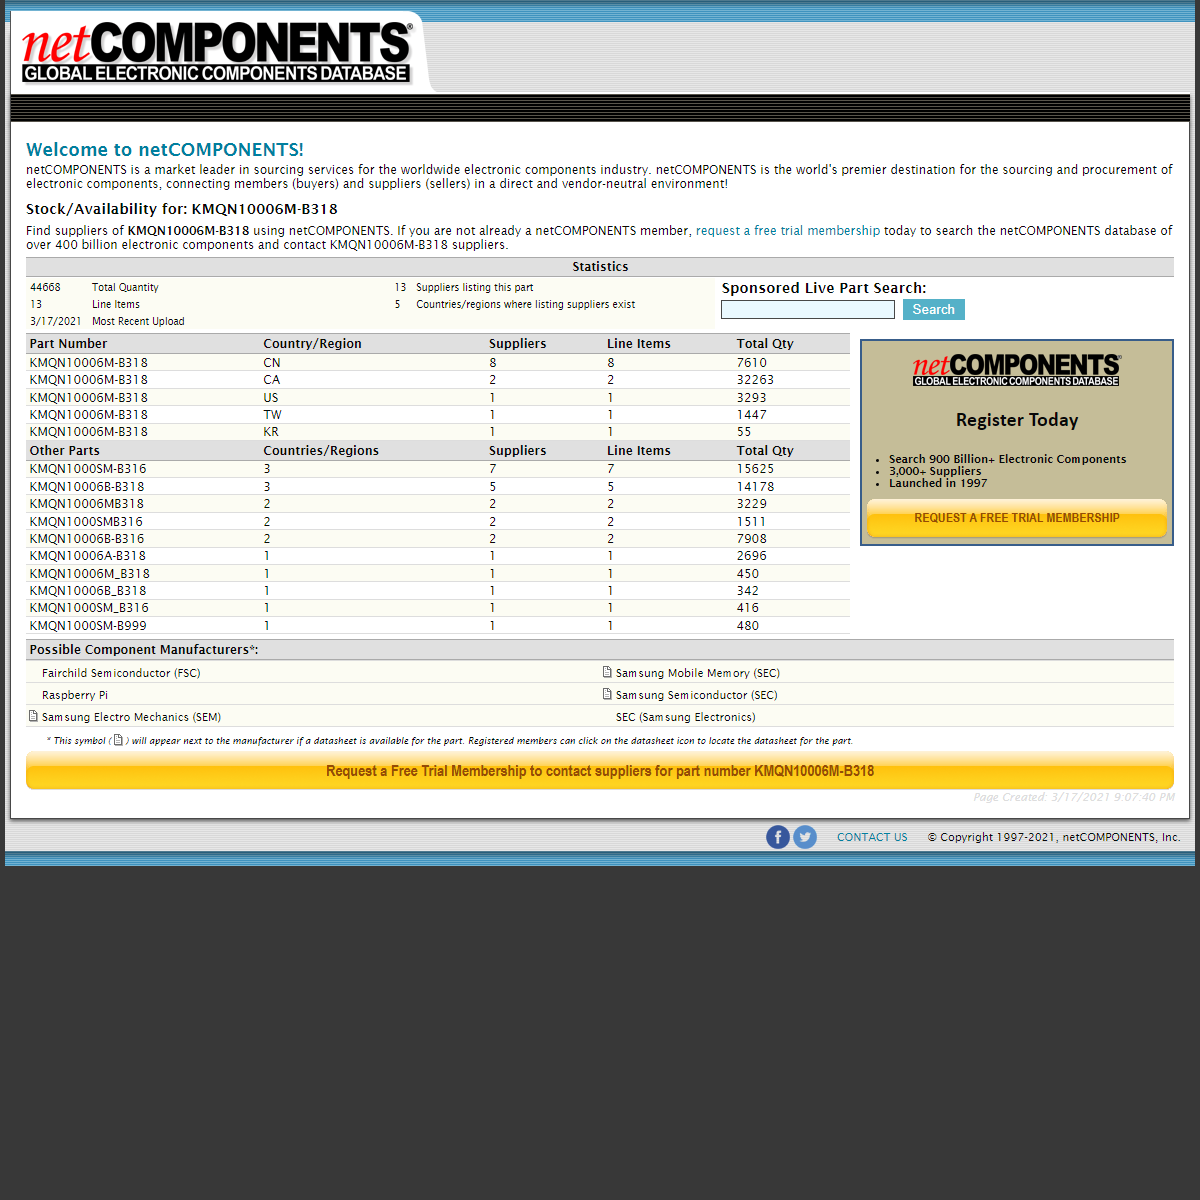 A complete backup of https://www.netcomponents.com/sitemap/KMQN10006M-B318.html